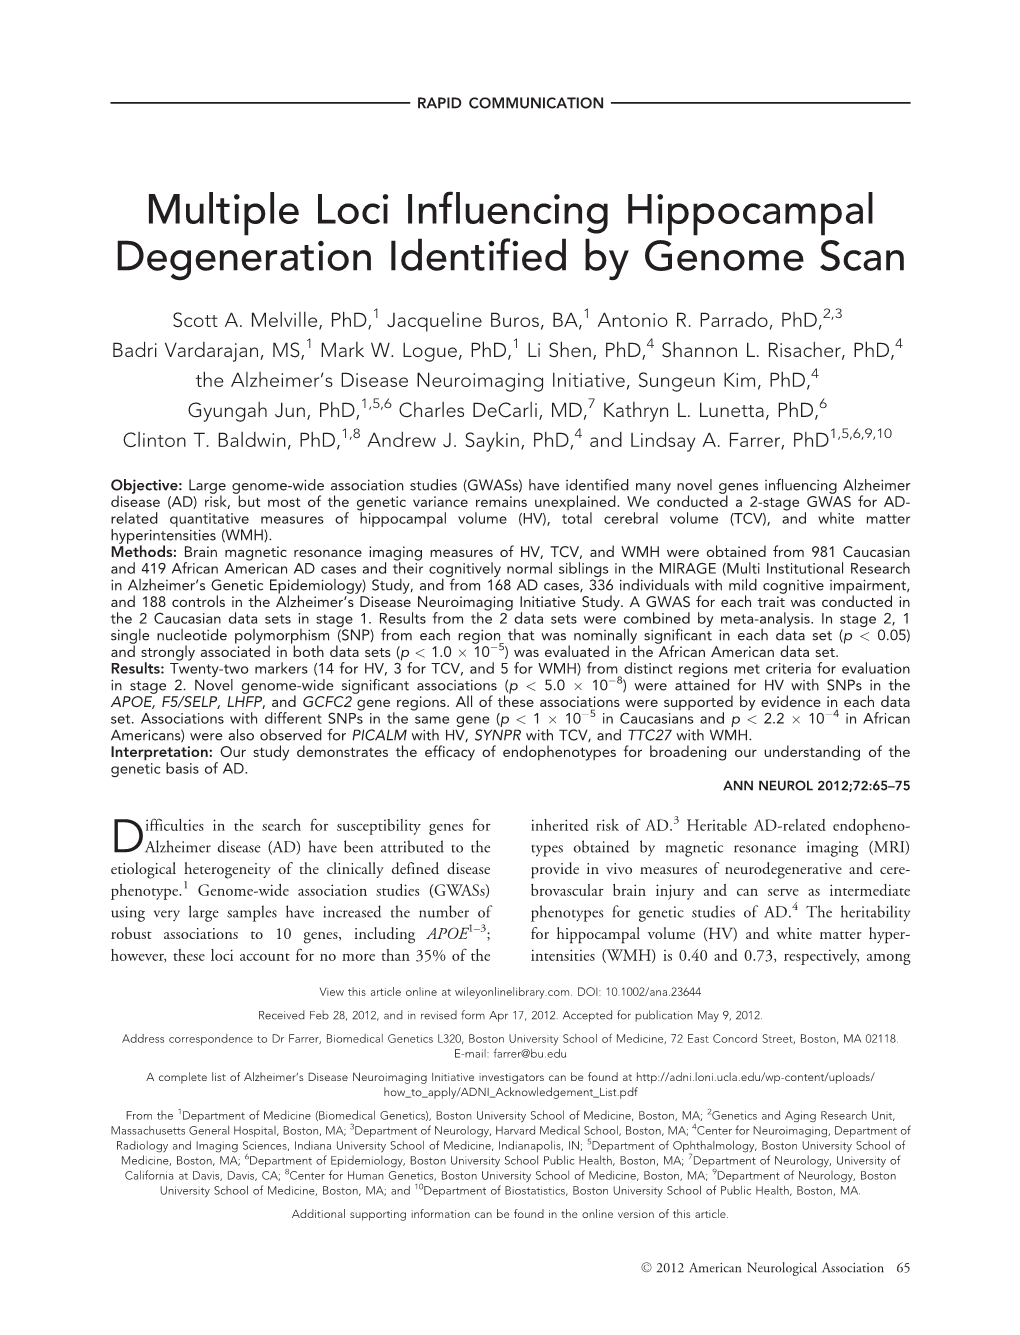 Multiple Loci Influencing Hippocampal Degeneration Identified by Genome Scan